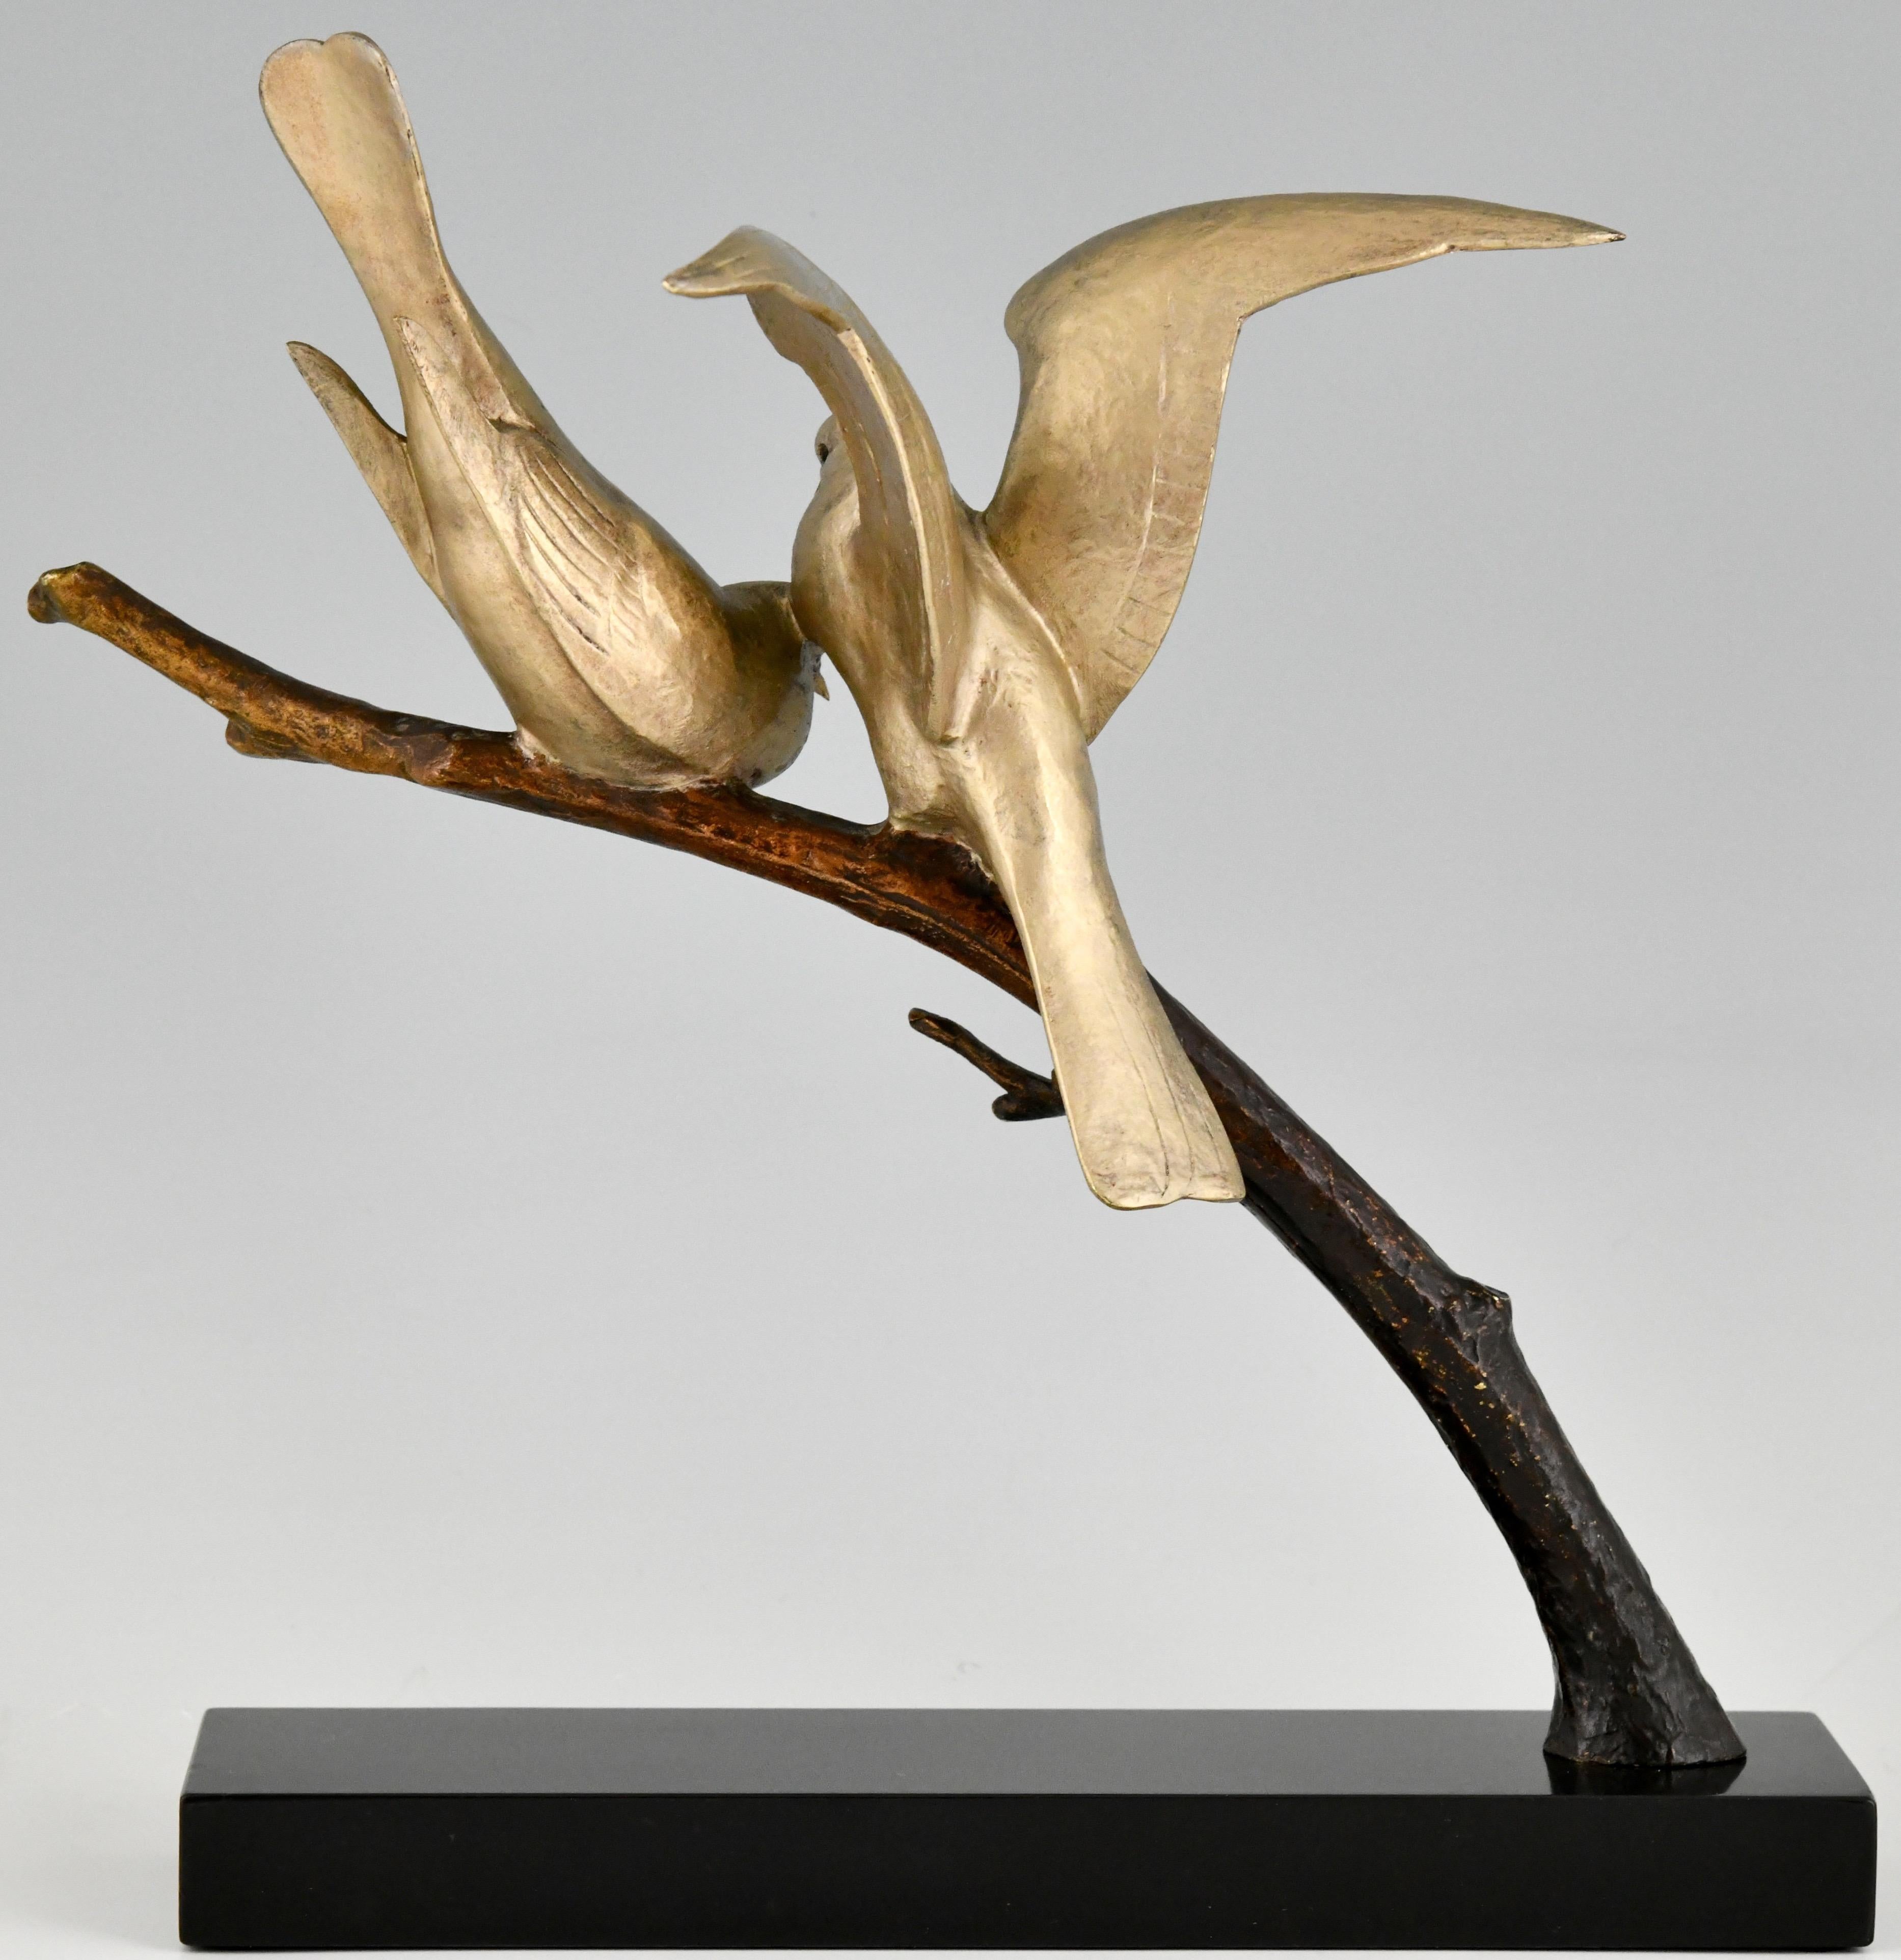 Early 20th Century Art Deco Bronze Sculpture of Two Birds on a Branch Andre Vincent Becquerel, 1925